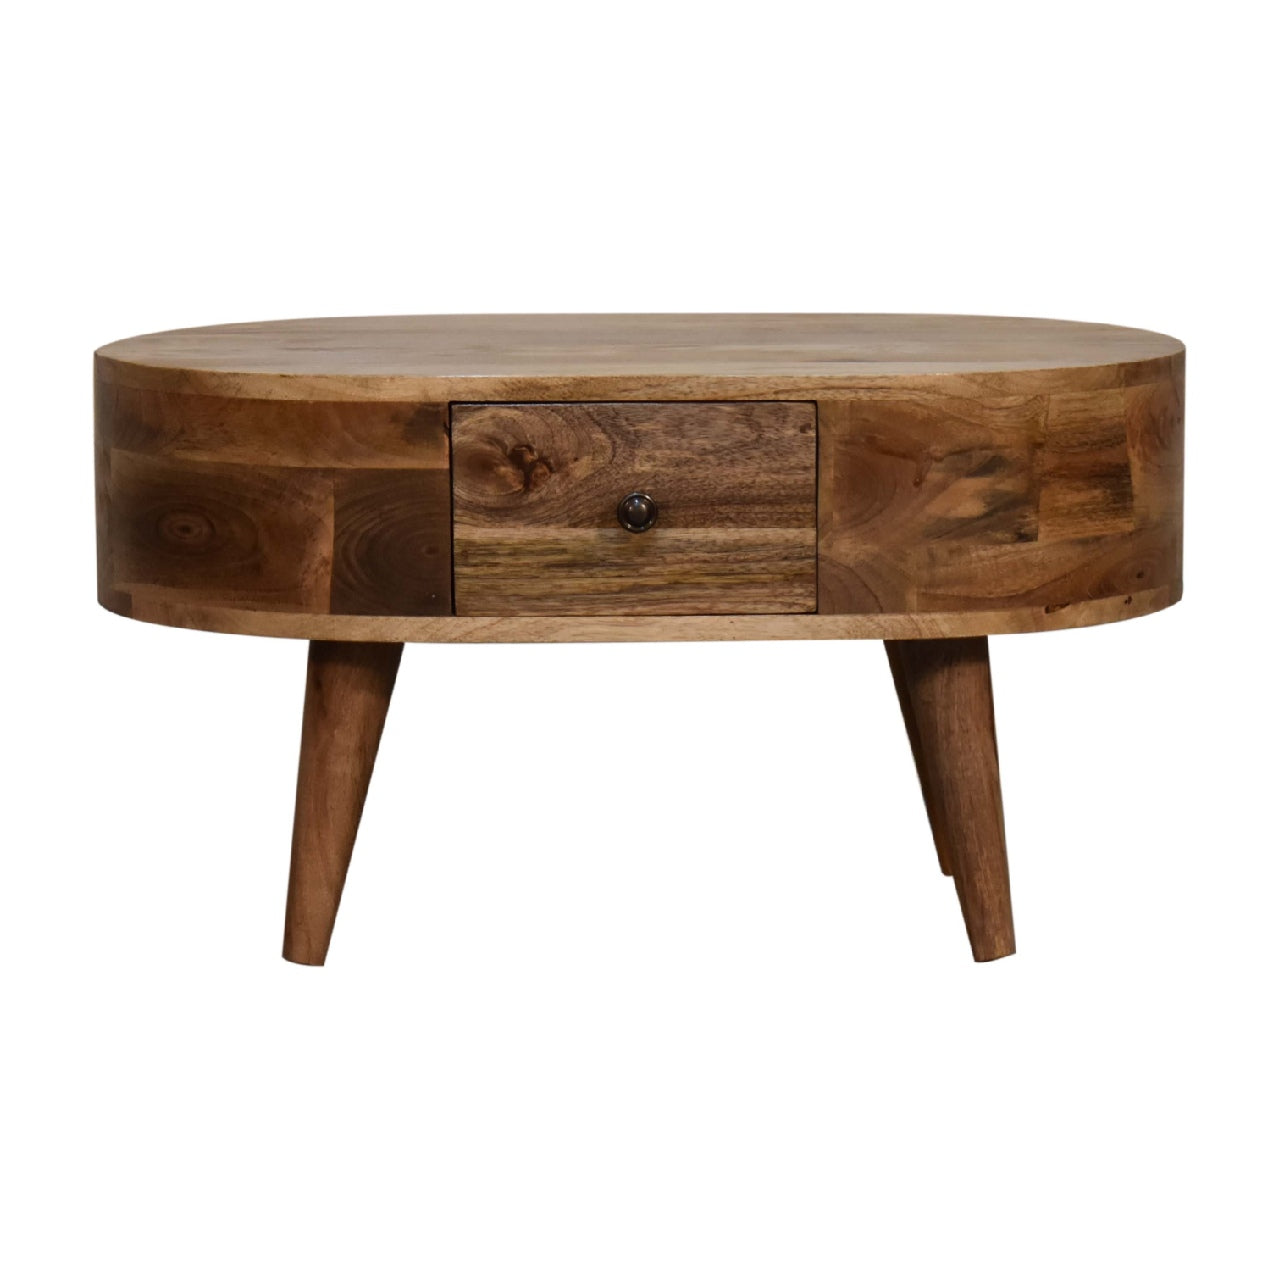 View Mini Oakish Rounded Coffee Table information